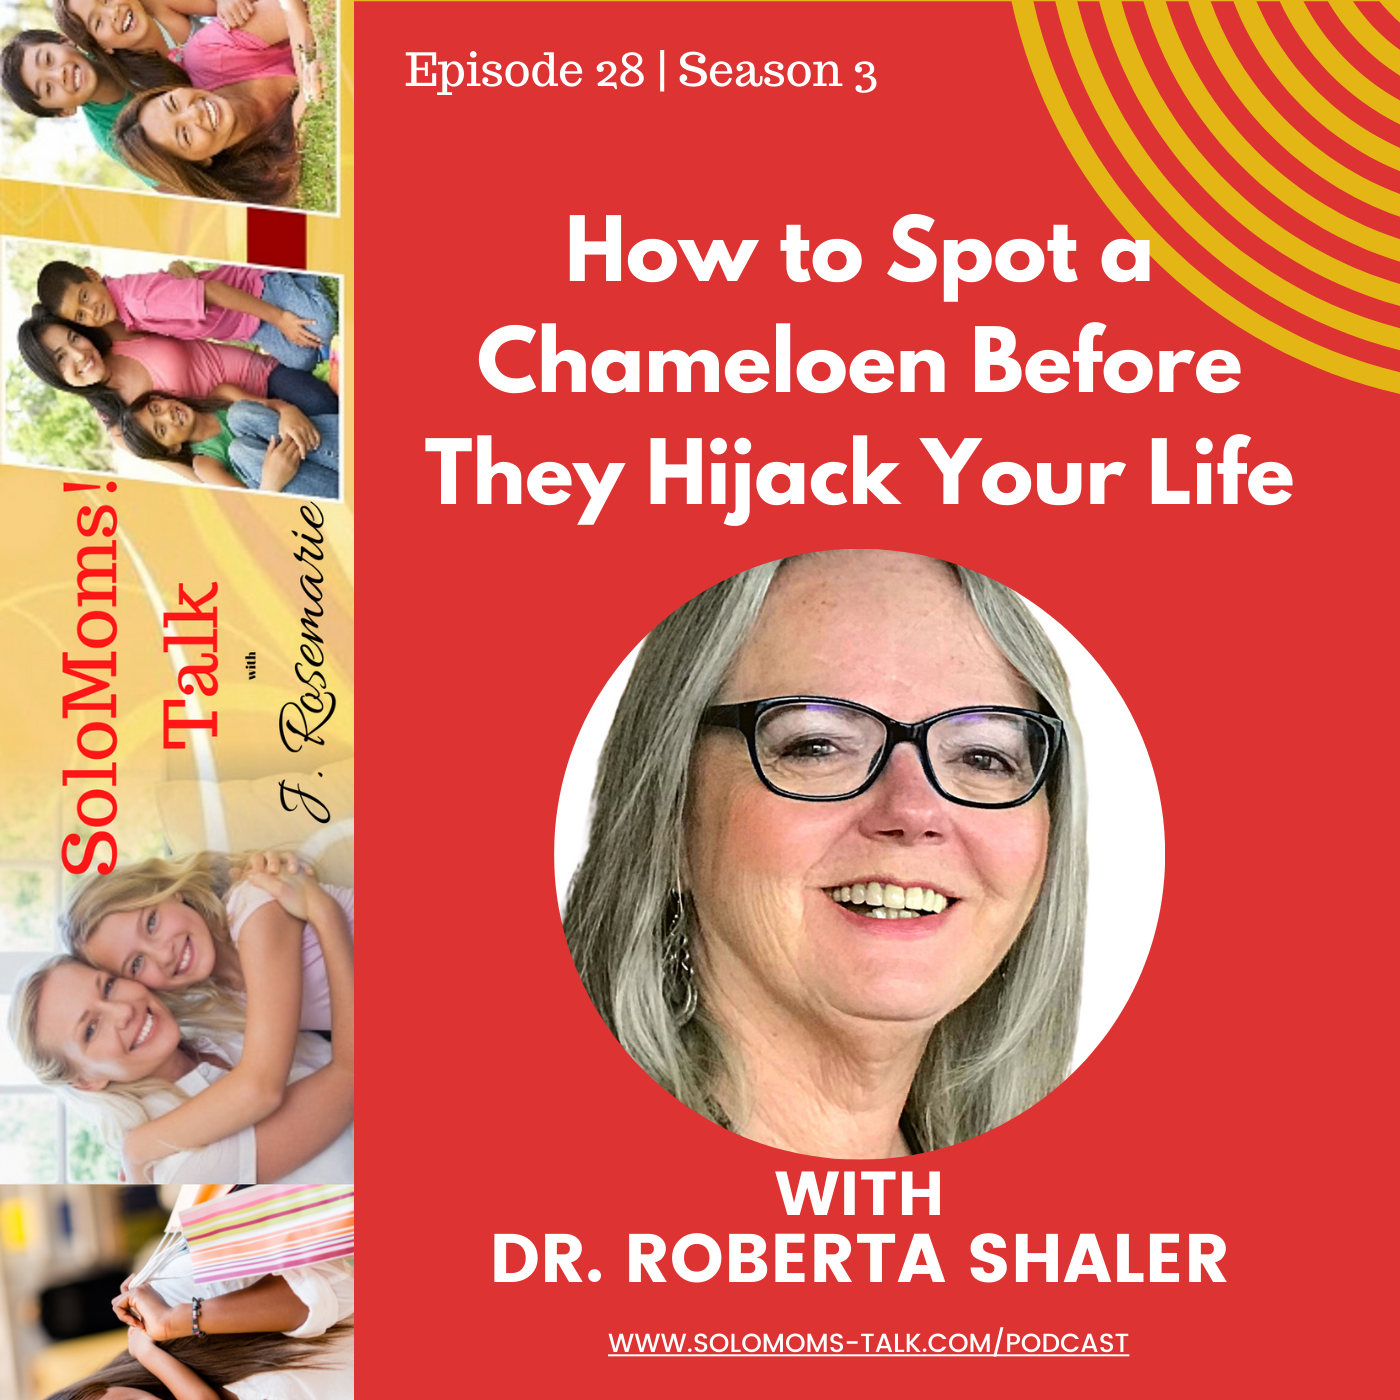 How to Spot a Chameleon Before They Hijack Your Life - Dr. Roberta Shaler